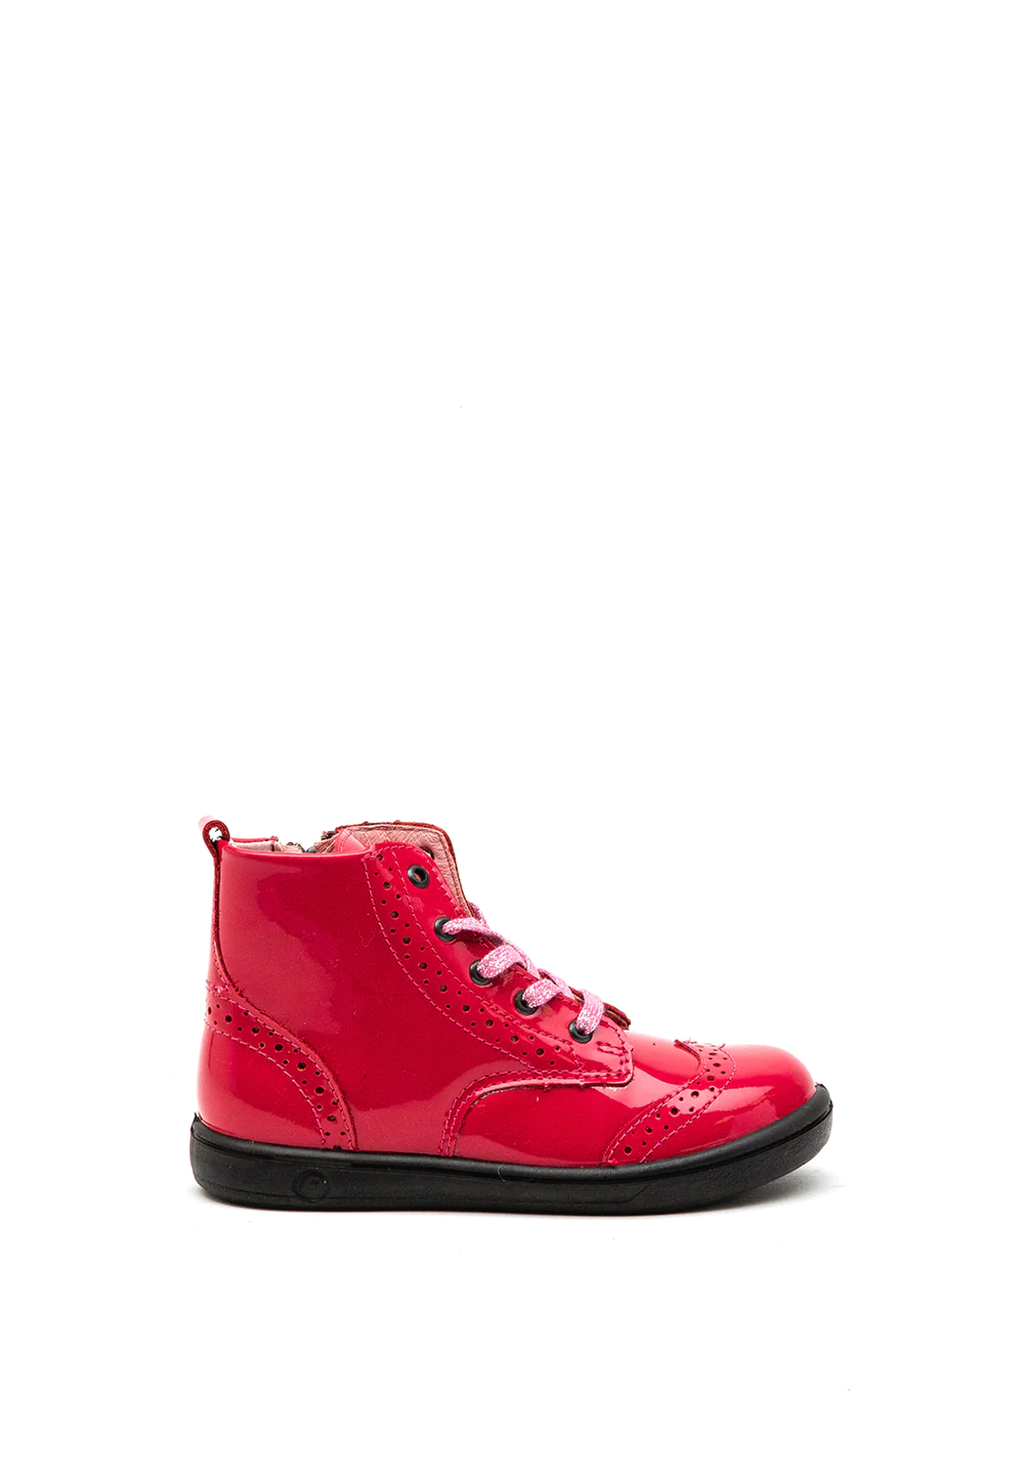 Ricosta Jemmy Pink Cherry Patent Ankle Boots | SALE